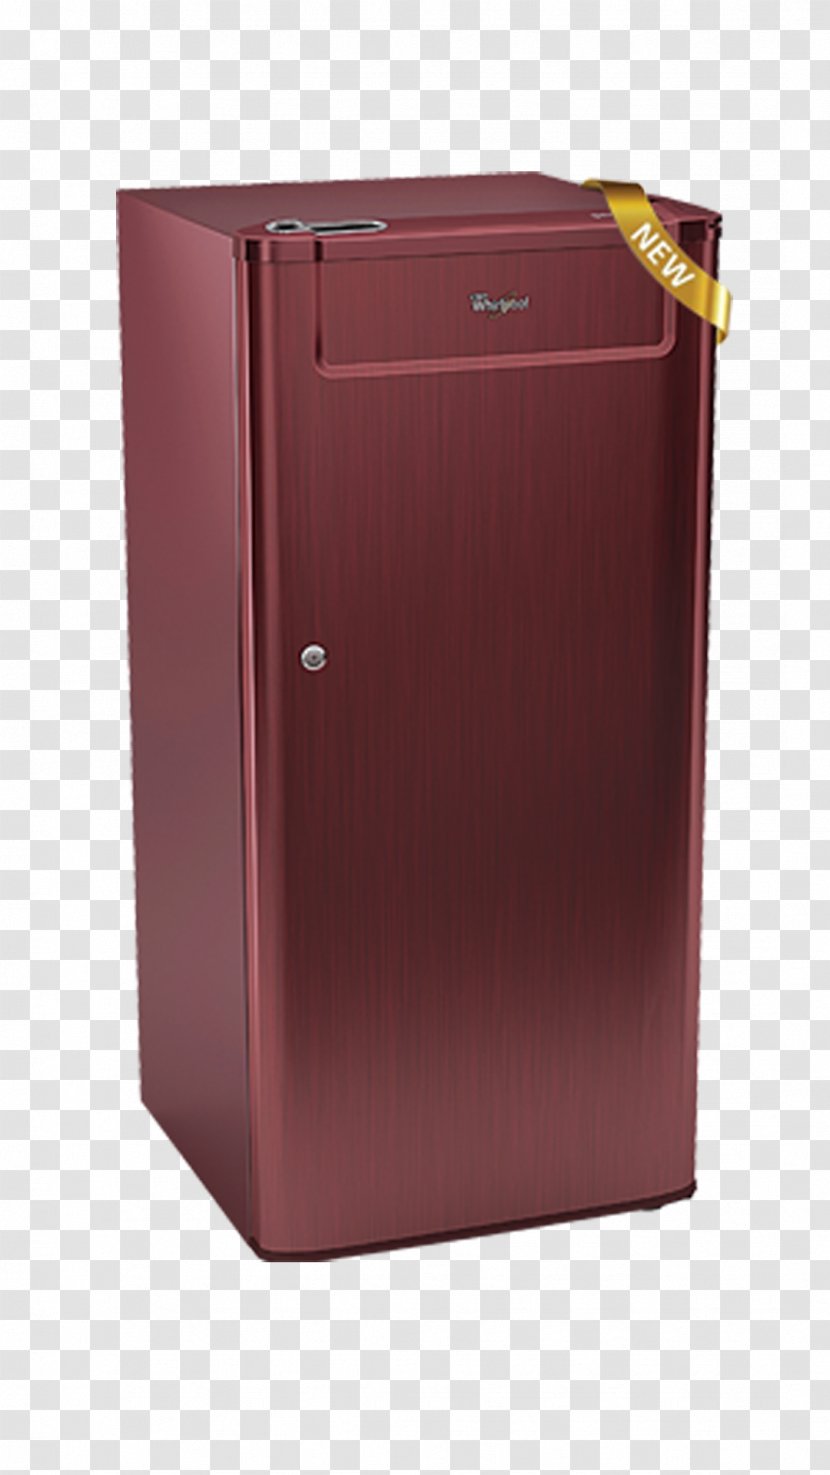 Direct Cool Refrigerator Whirlpool Corporation Home Appliance Of India Limited - Door Transparent PNG